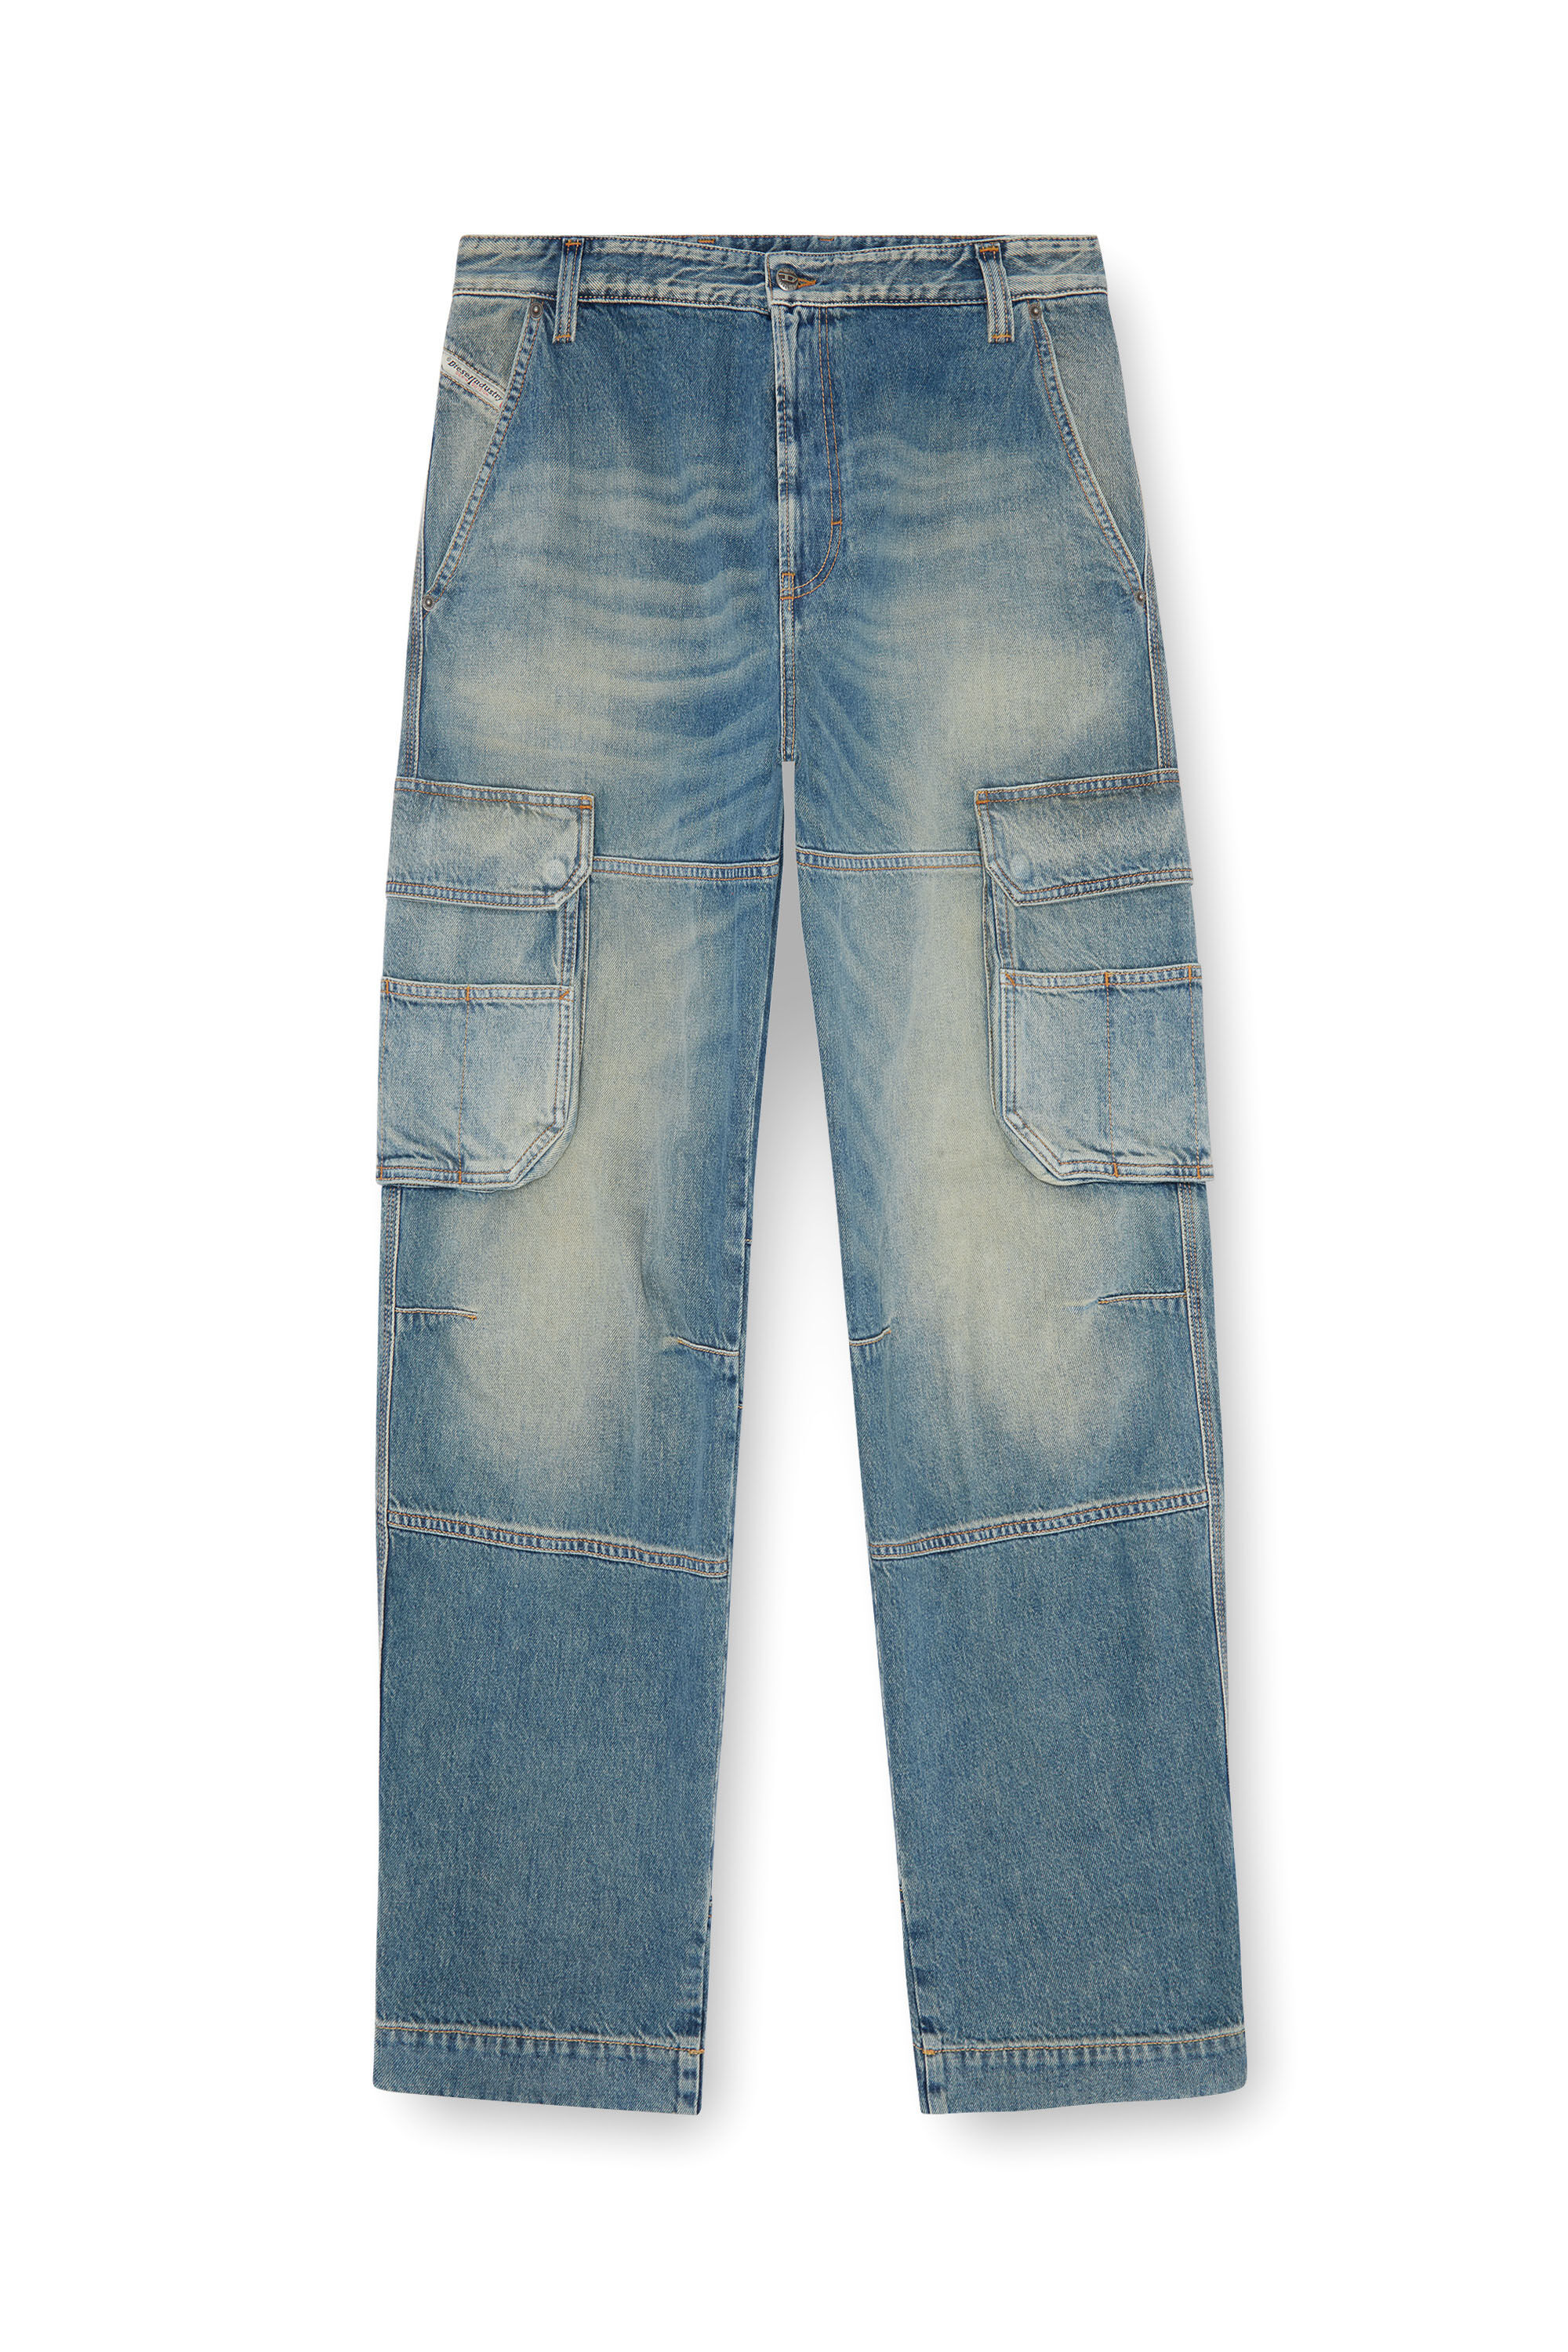 Diesel - Straight Jeans D-Fish 09J83, Hombre Straight Jeans - D-Fish in Azul marino - Image 2